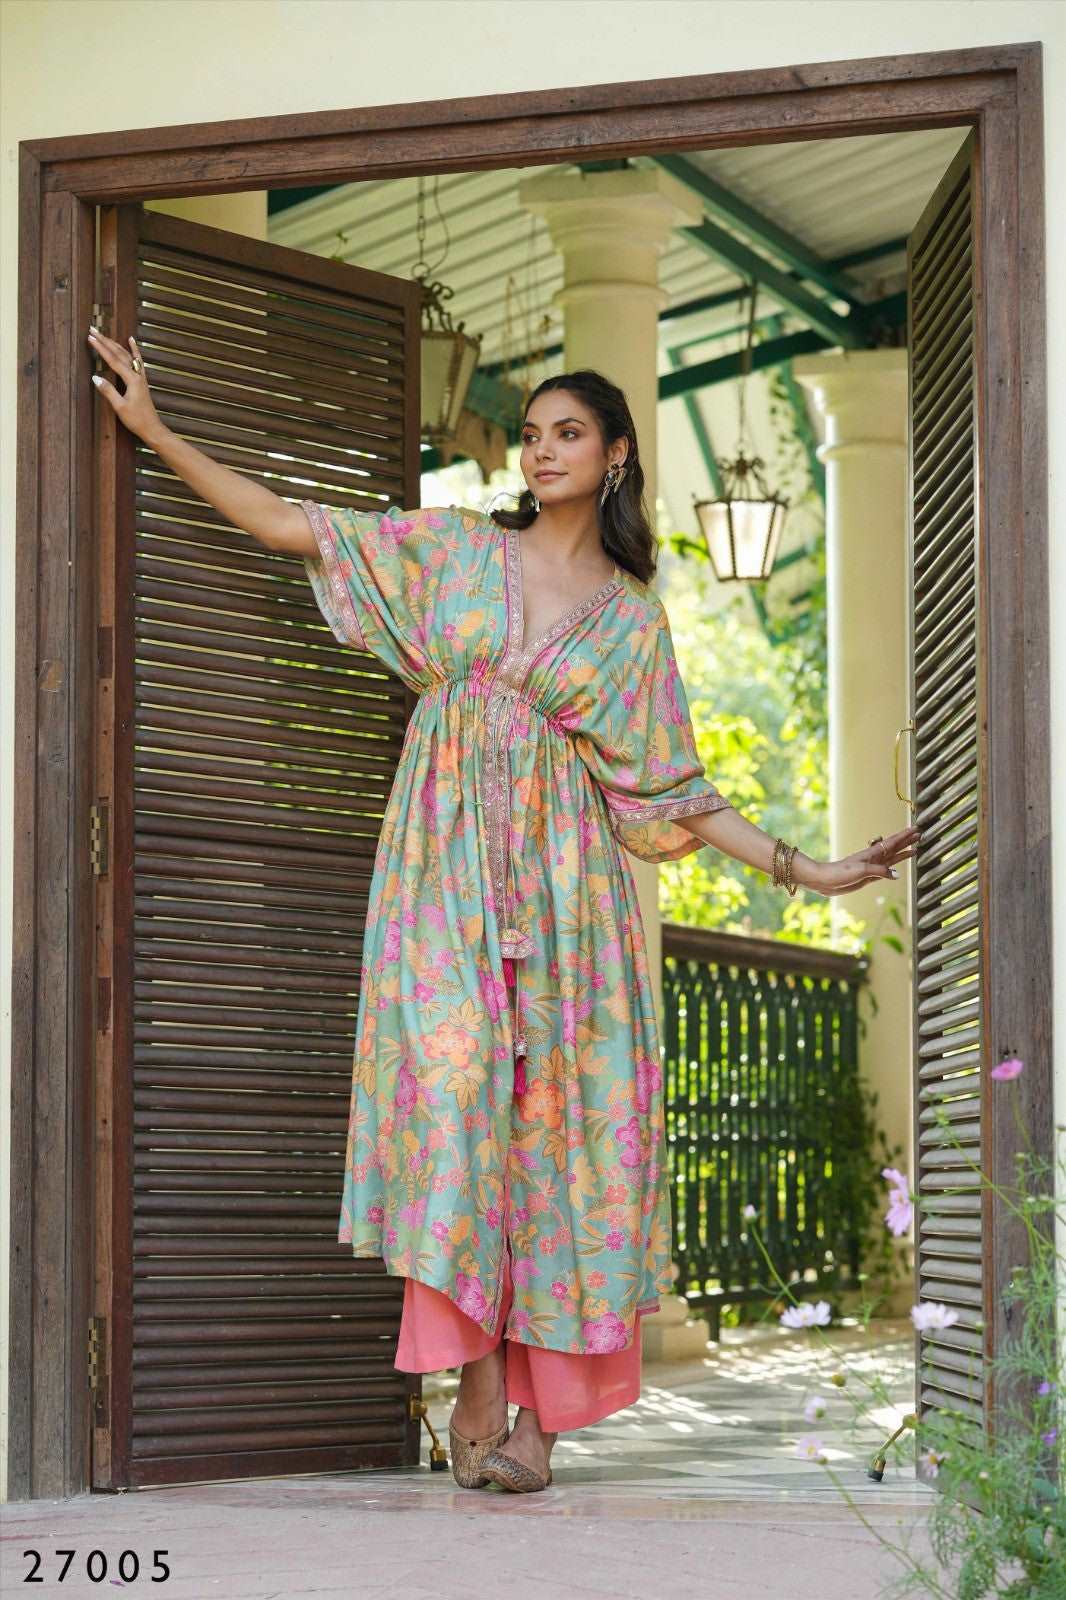 The model in the image is wearing Floral Print Kaftan Tunic with Palazzo from Alice Milan. Crafted with the finest materials and impeccable attention to detail, the  looks premium, trendy, luxurious and offers unparalleled comfort. It’s a perfect clothing option for loungewear, resort wear, party wear or for an airport look. The woman in the image looks happy, and confident with her style statement putting a happy smile on her face.